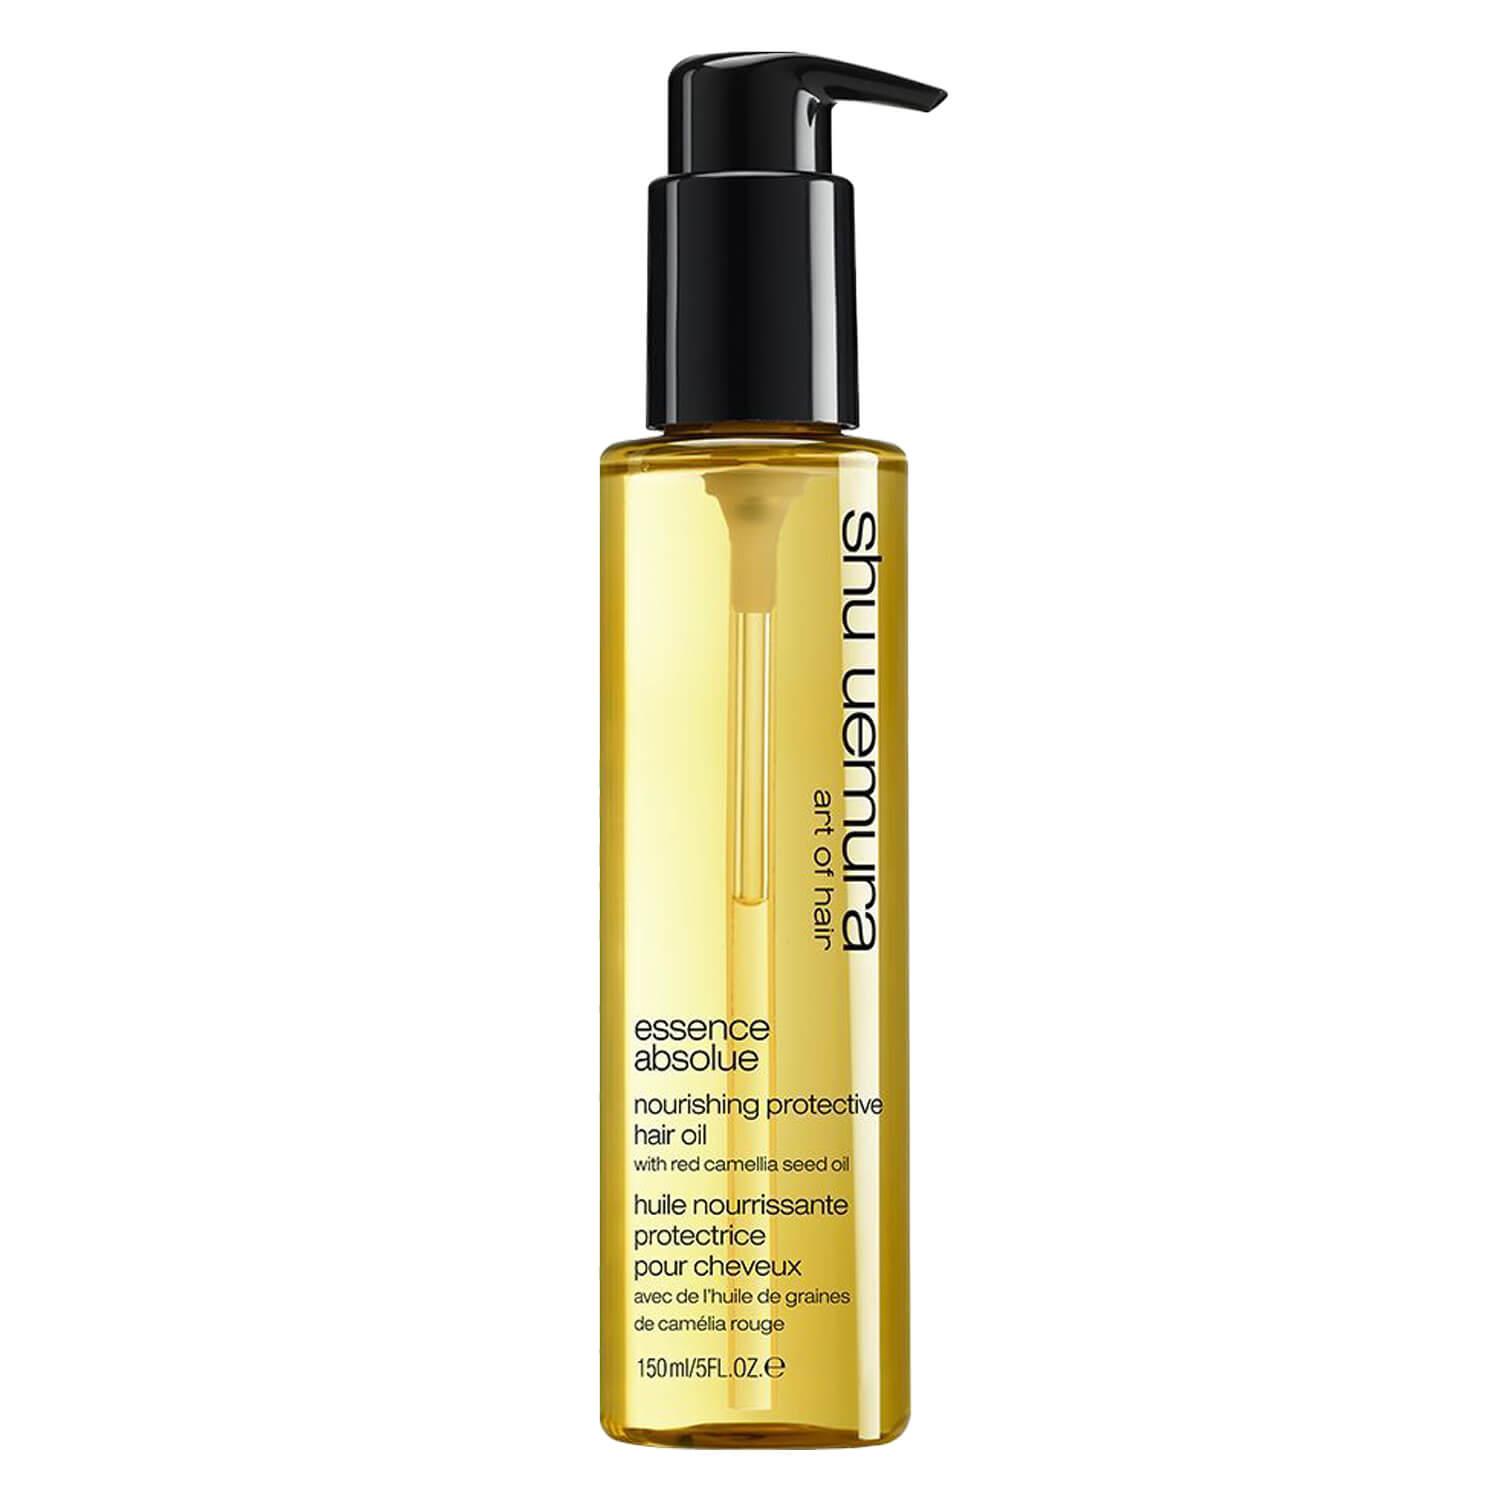 Essence Absolue - Nourishing Protective Hair Oil